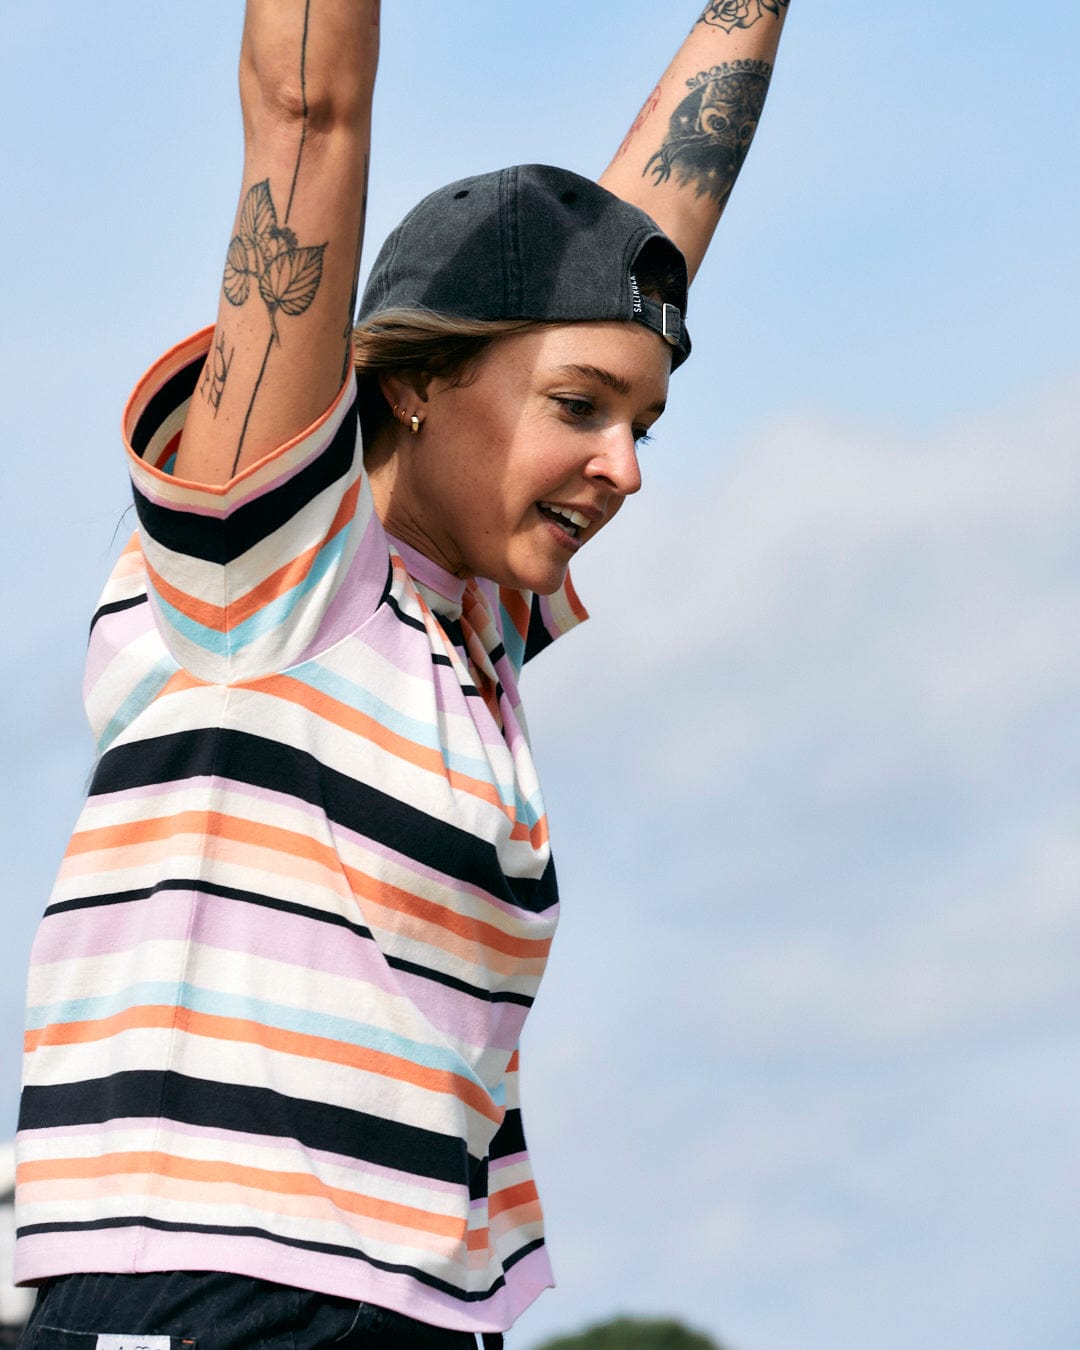 A joyful woman wearing a Saltrock Palm Cap - Dark Grey with palm print embroidery and a striped shirt, raising her arms with visible tattoos on a sunny day.